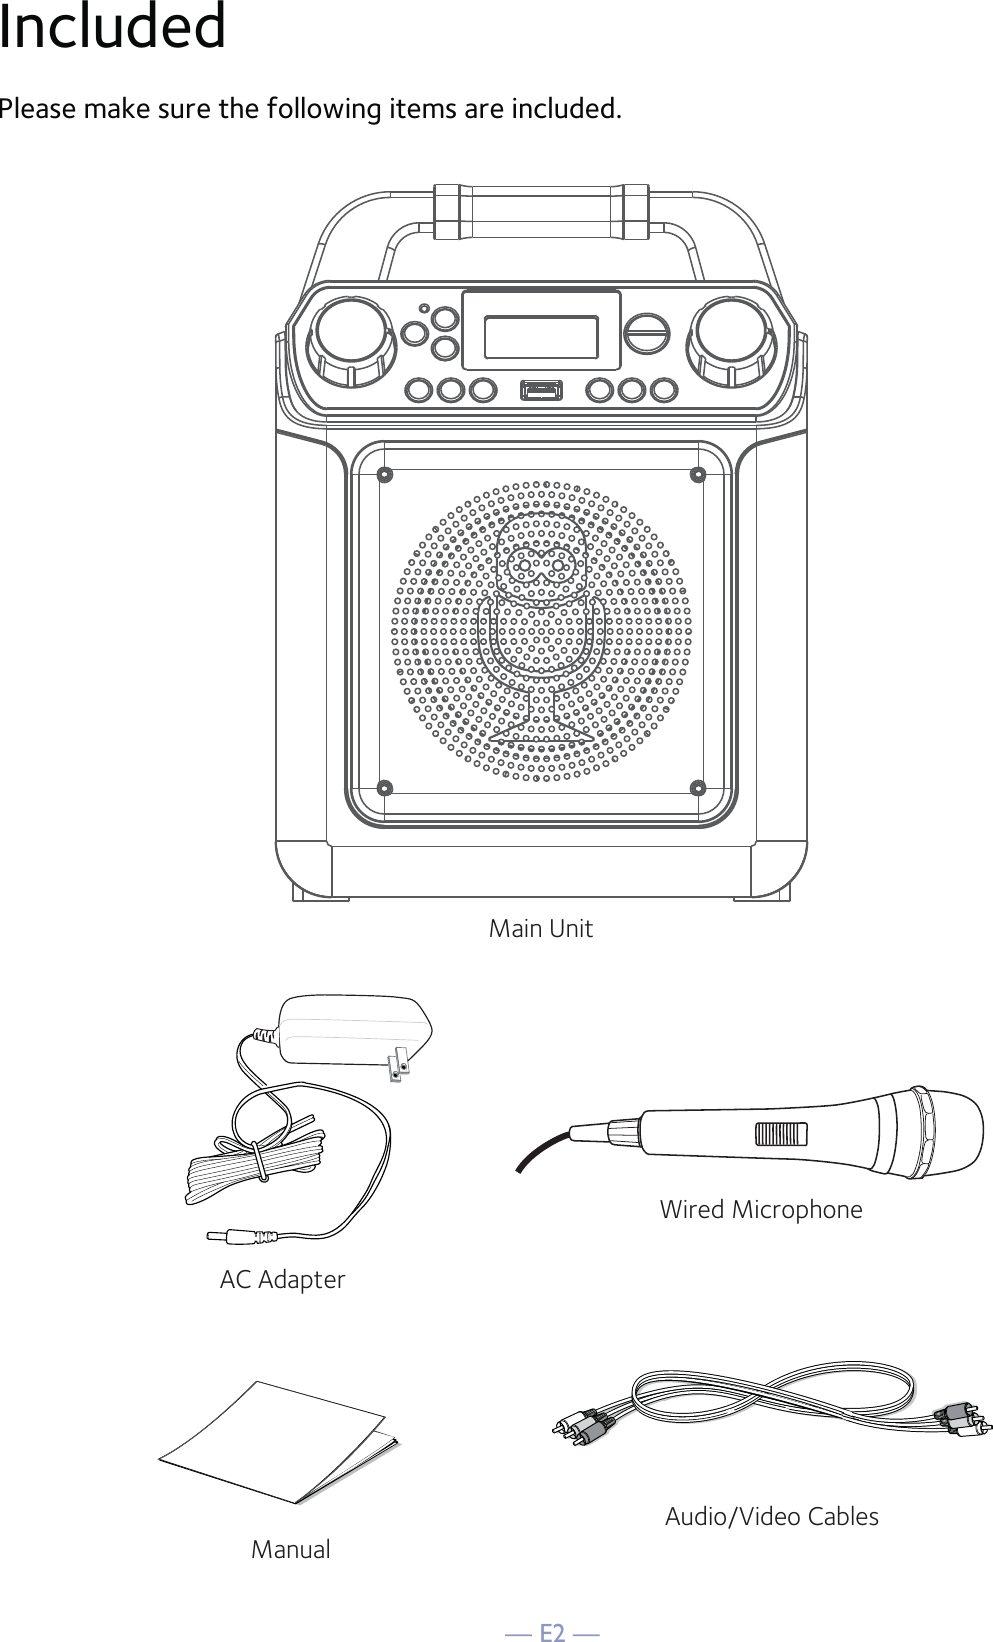 — E2 —IncludedPlease make sure the following items are included.Wired MicrophoneMain UnitAC AdapterAudio/Video CablesManual